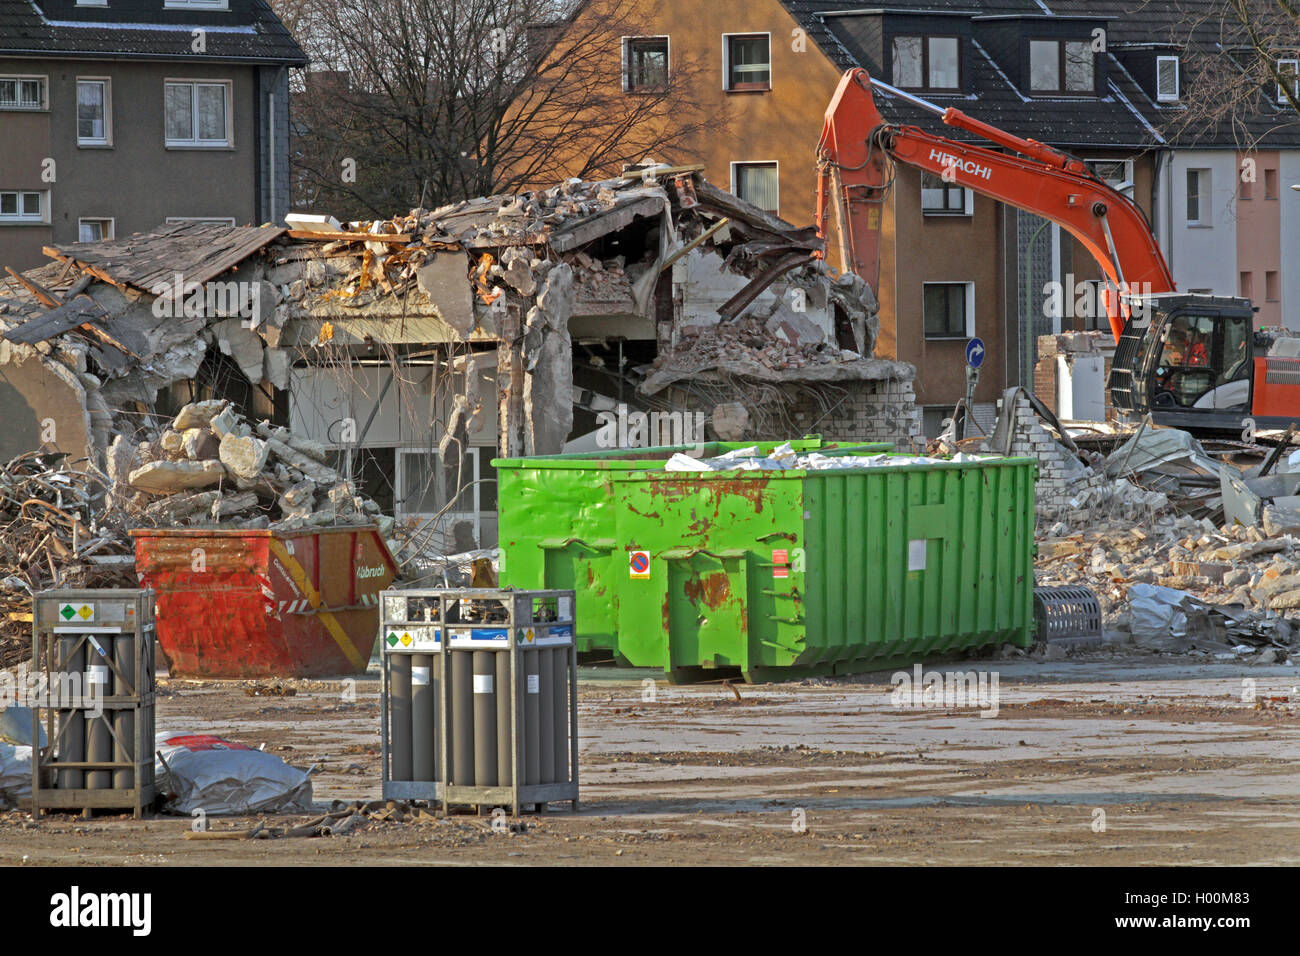 construction materials recycling after building demolition, Germany Stock Photo